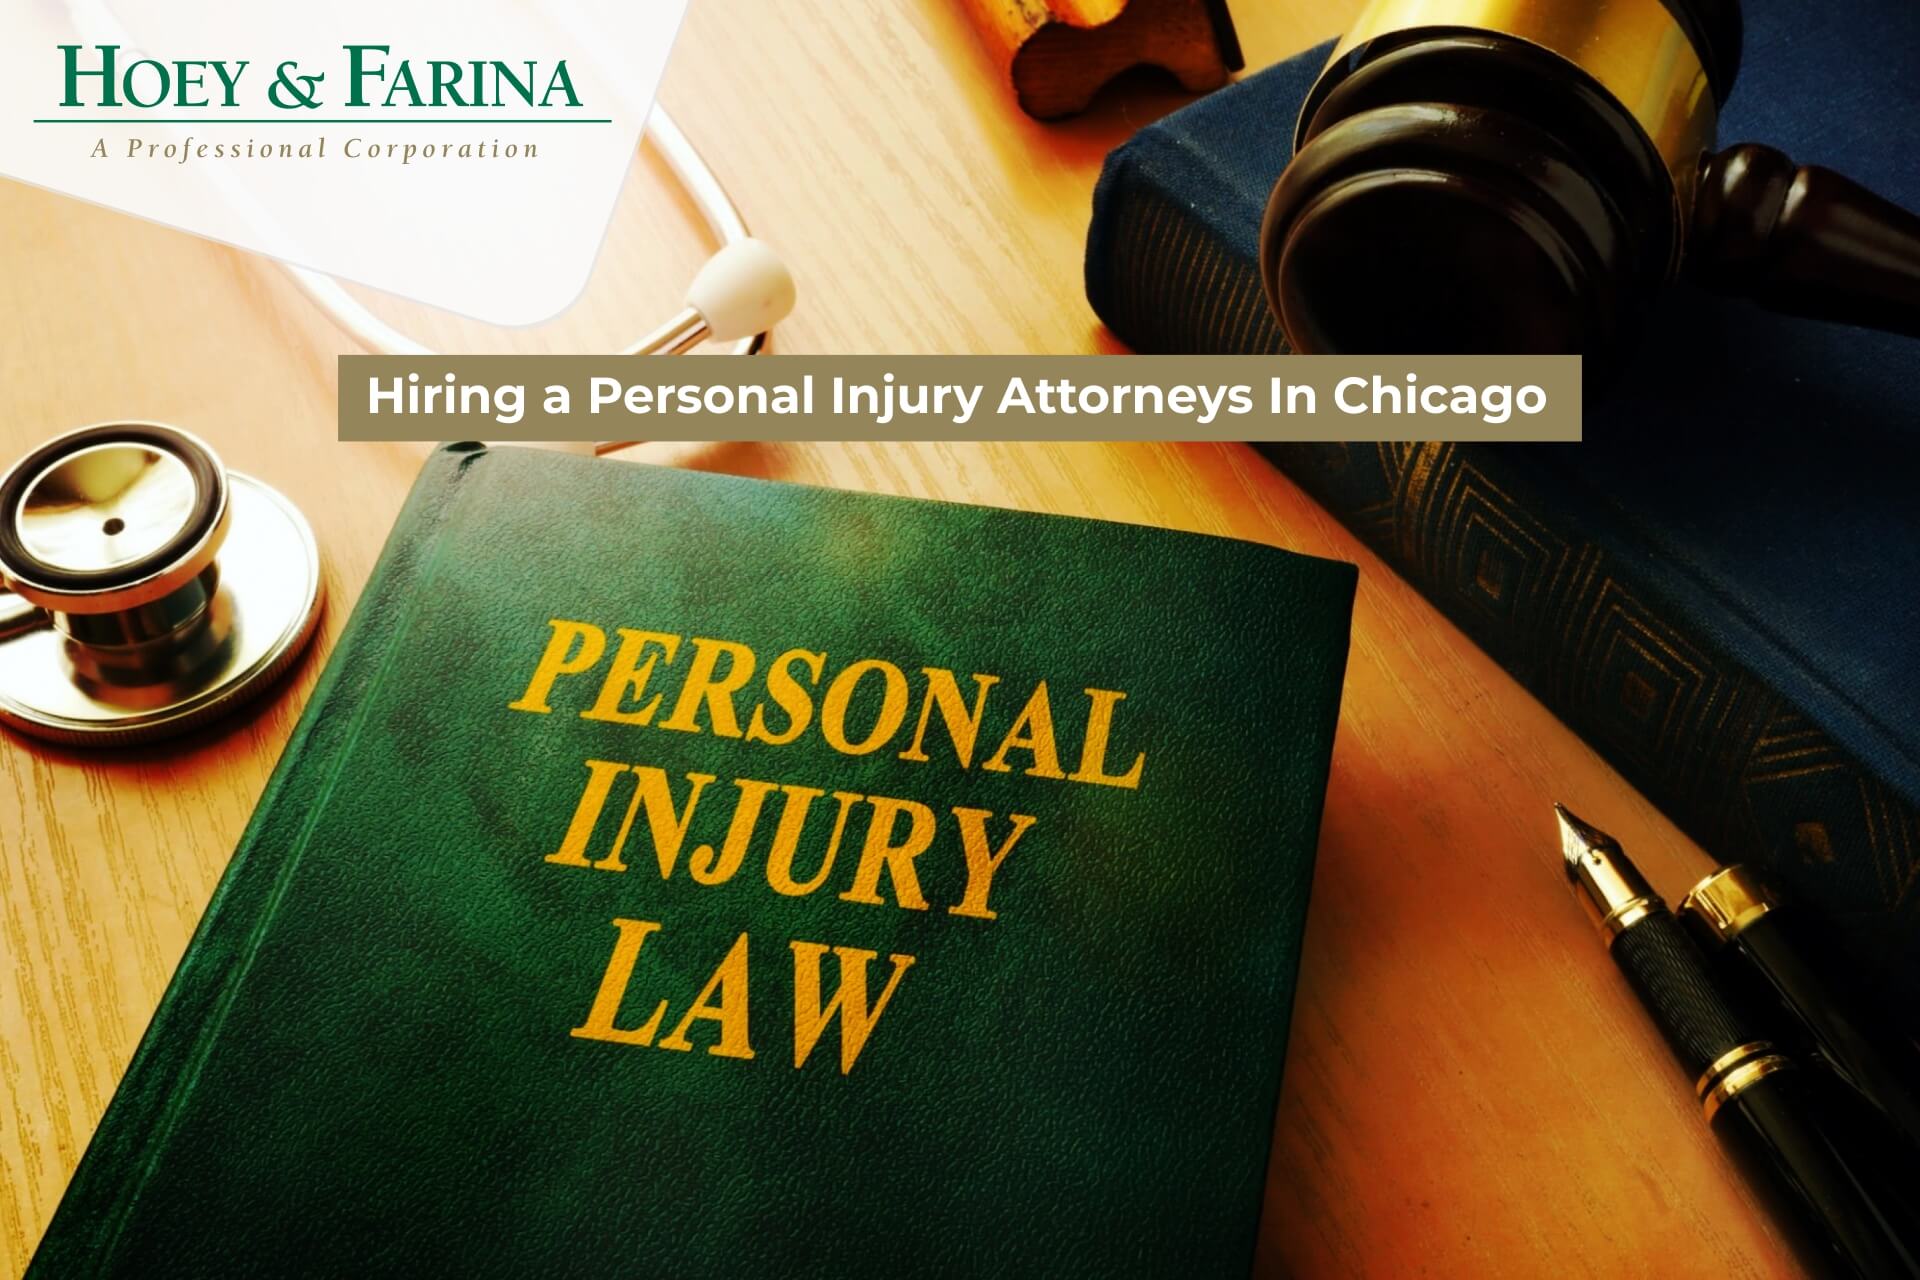 Hiring a Personal Injury Attorney in Chicago